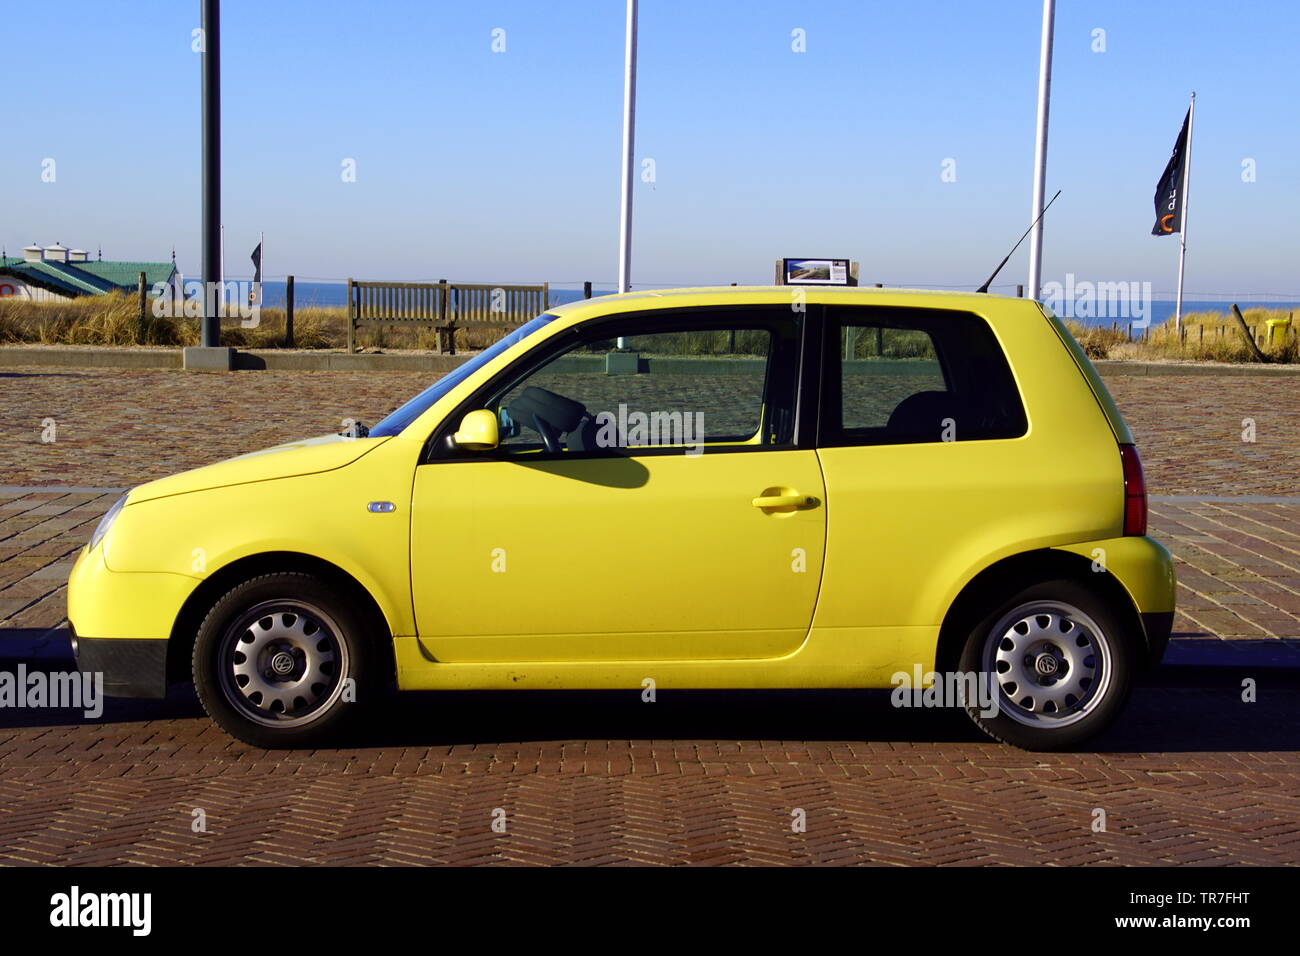 Noordwijk, the Netherlands - Januari 20, 2019: Yellow Volkswagen Lupo parked by the side of the road. Nobody in the vehicle. Stock Photo